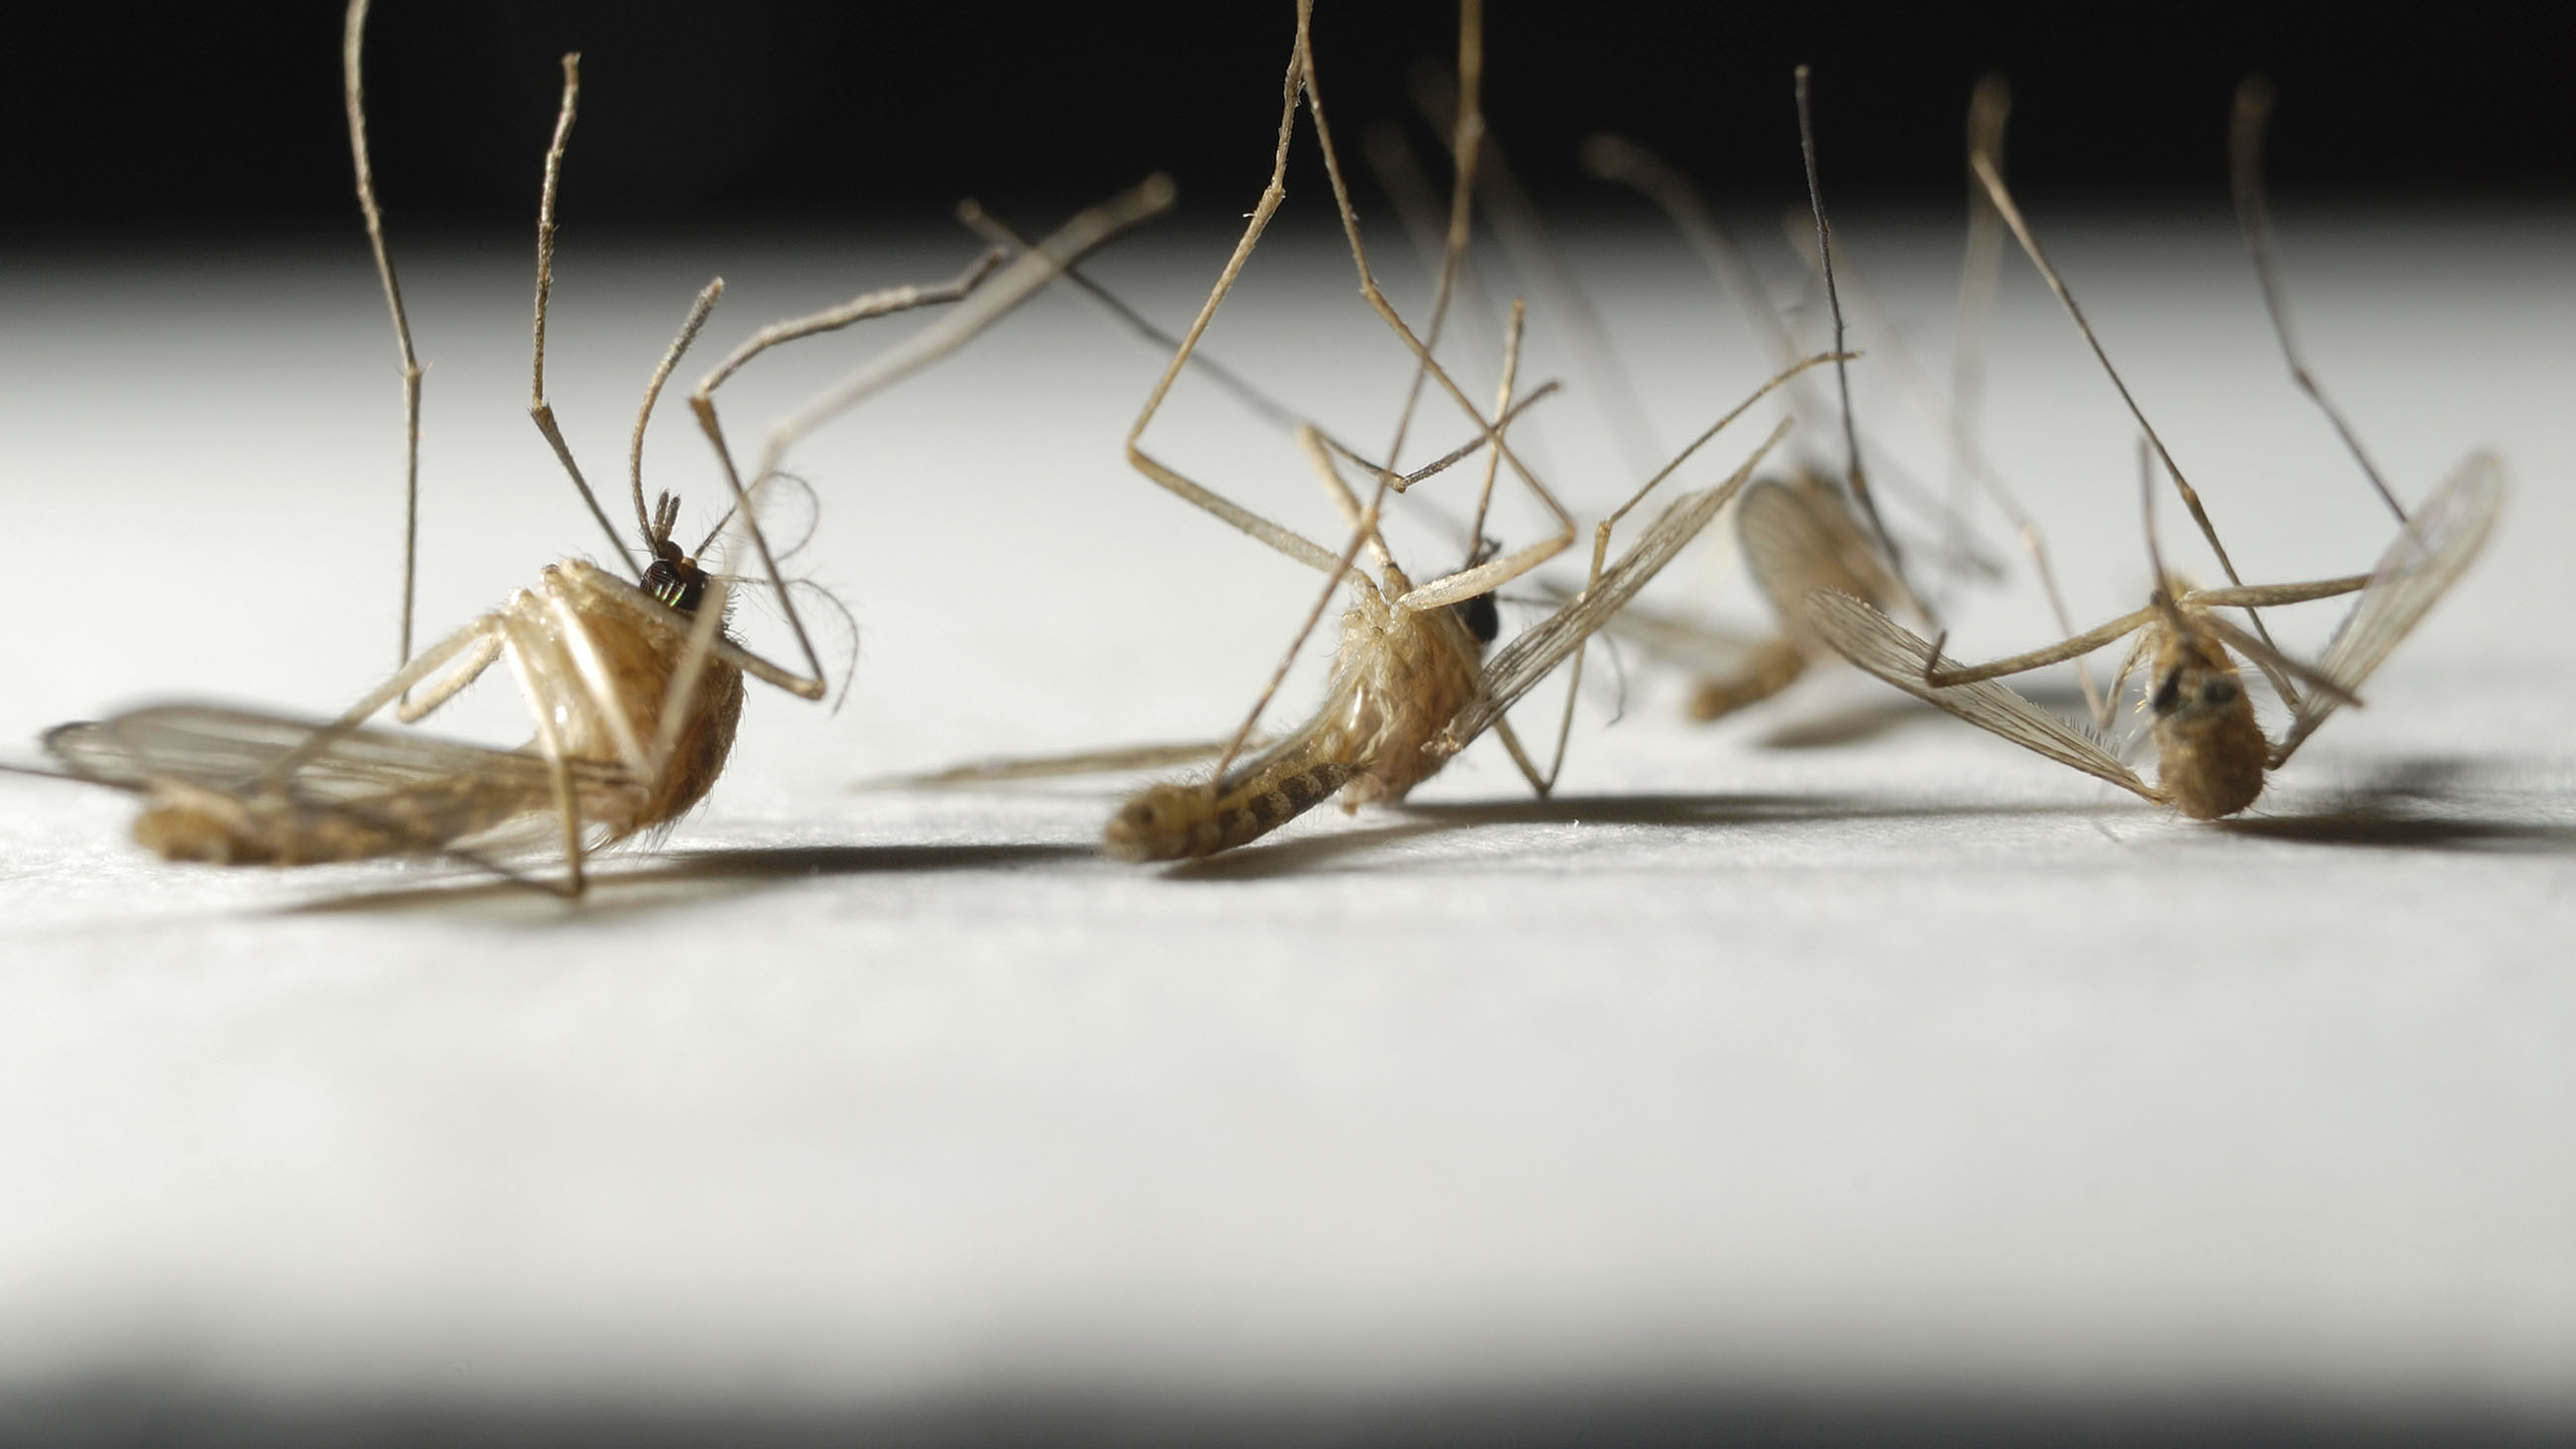 Would eradicating all mosquitos really solve anything? Not everyone thinks so.